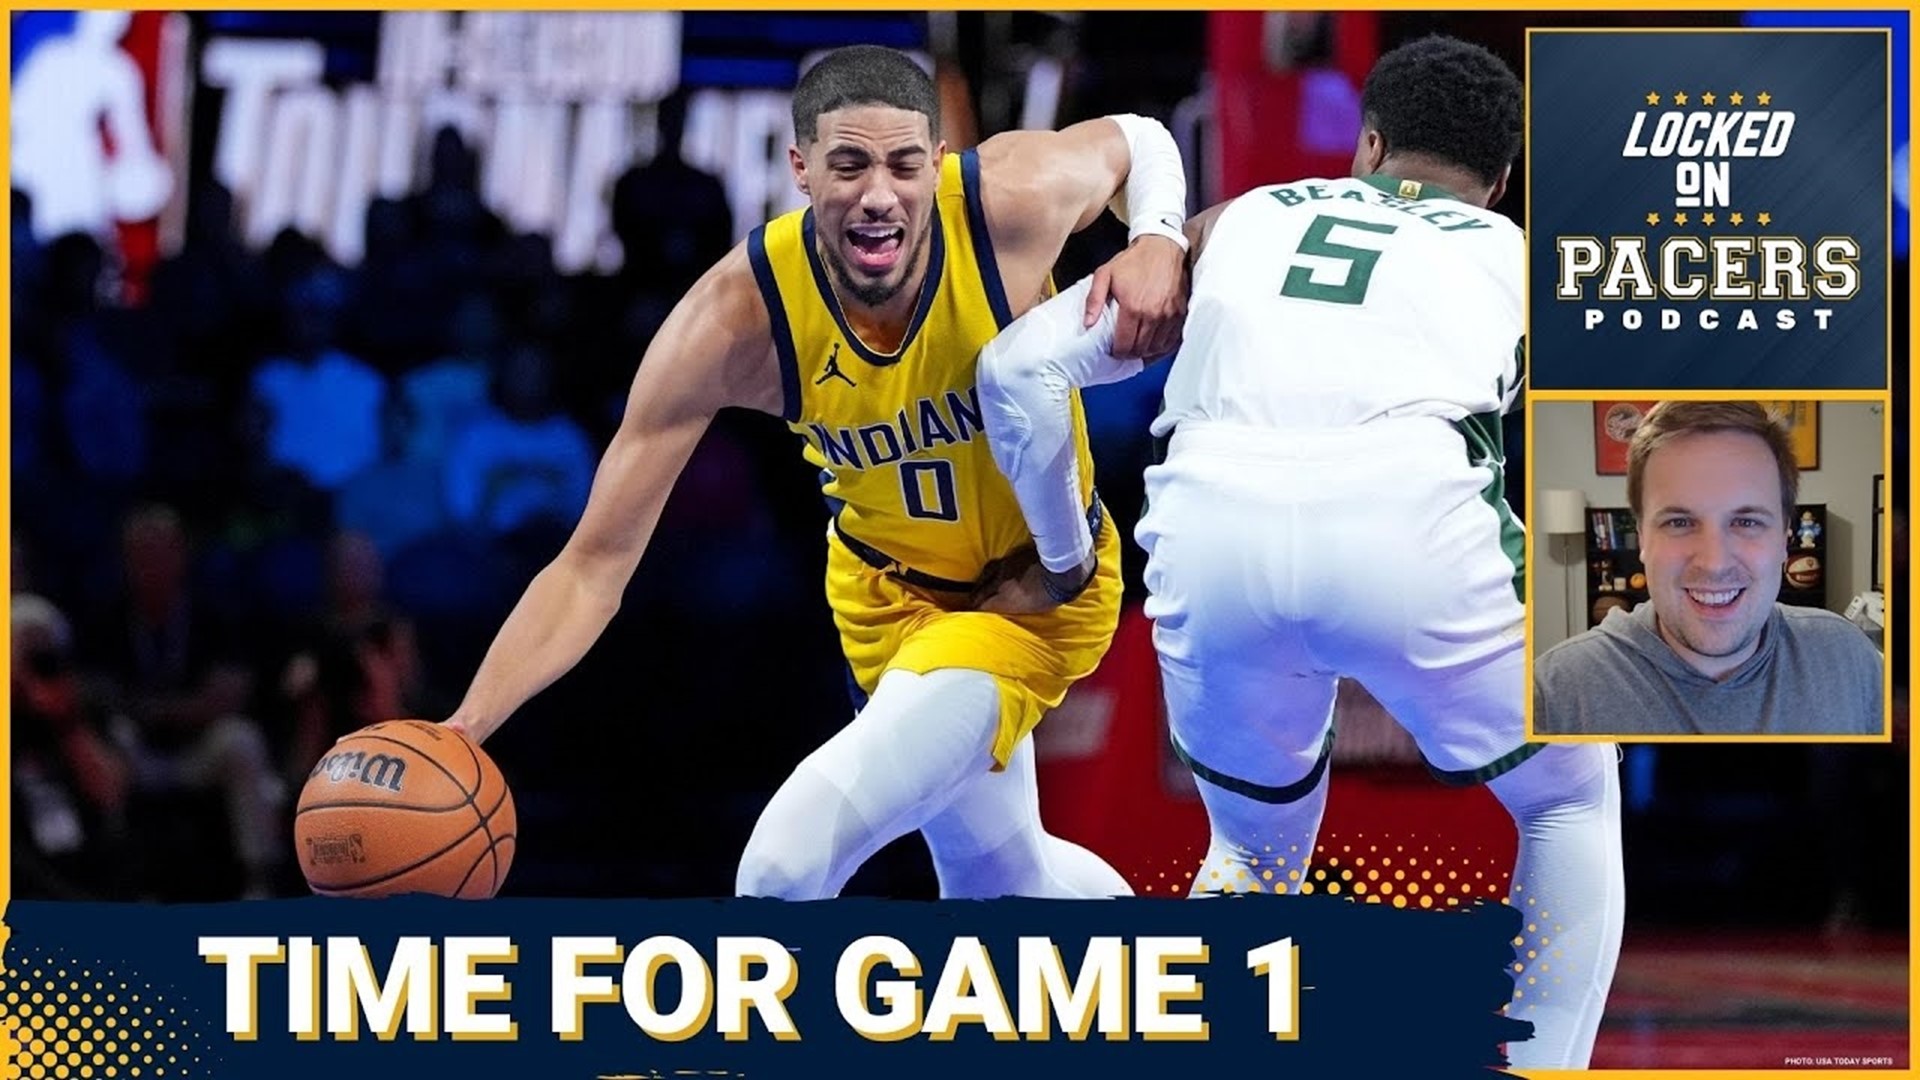 The Indiana Pacers kick off their first-round series with the Milwaukee Bucks this weekend. Why is Game 1 so important?